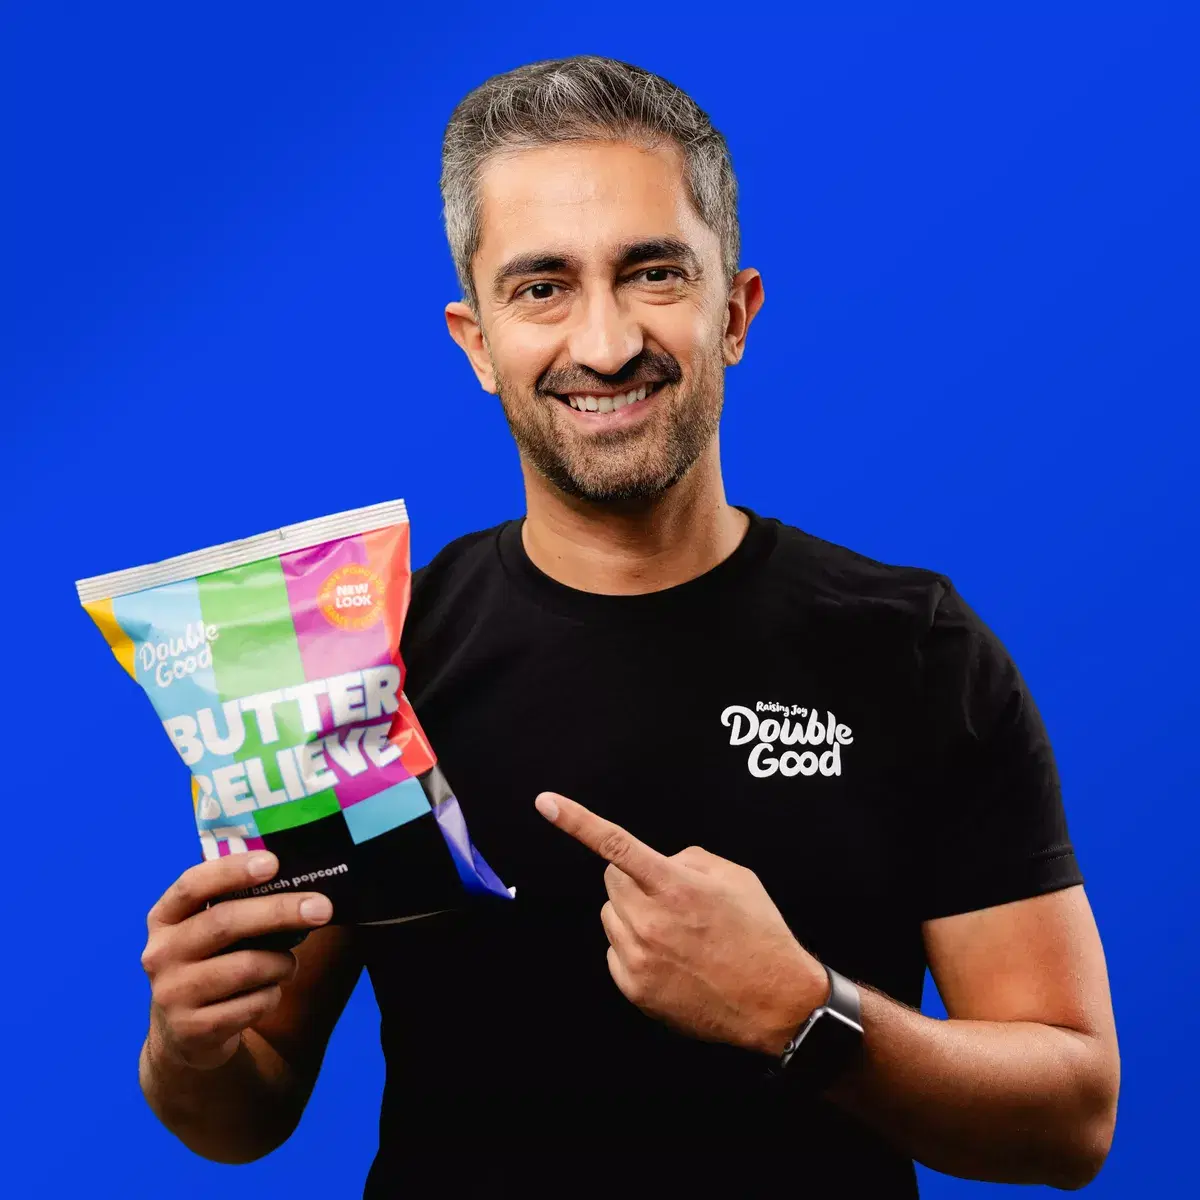 Anurag is holding a bag of popcorn in one hand, smiling and pointing with the other hand at the bag of popcorn.